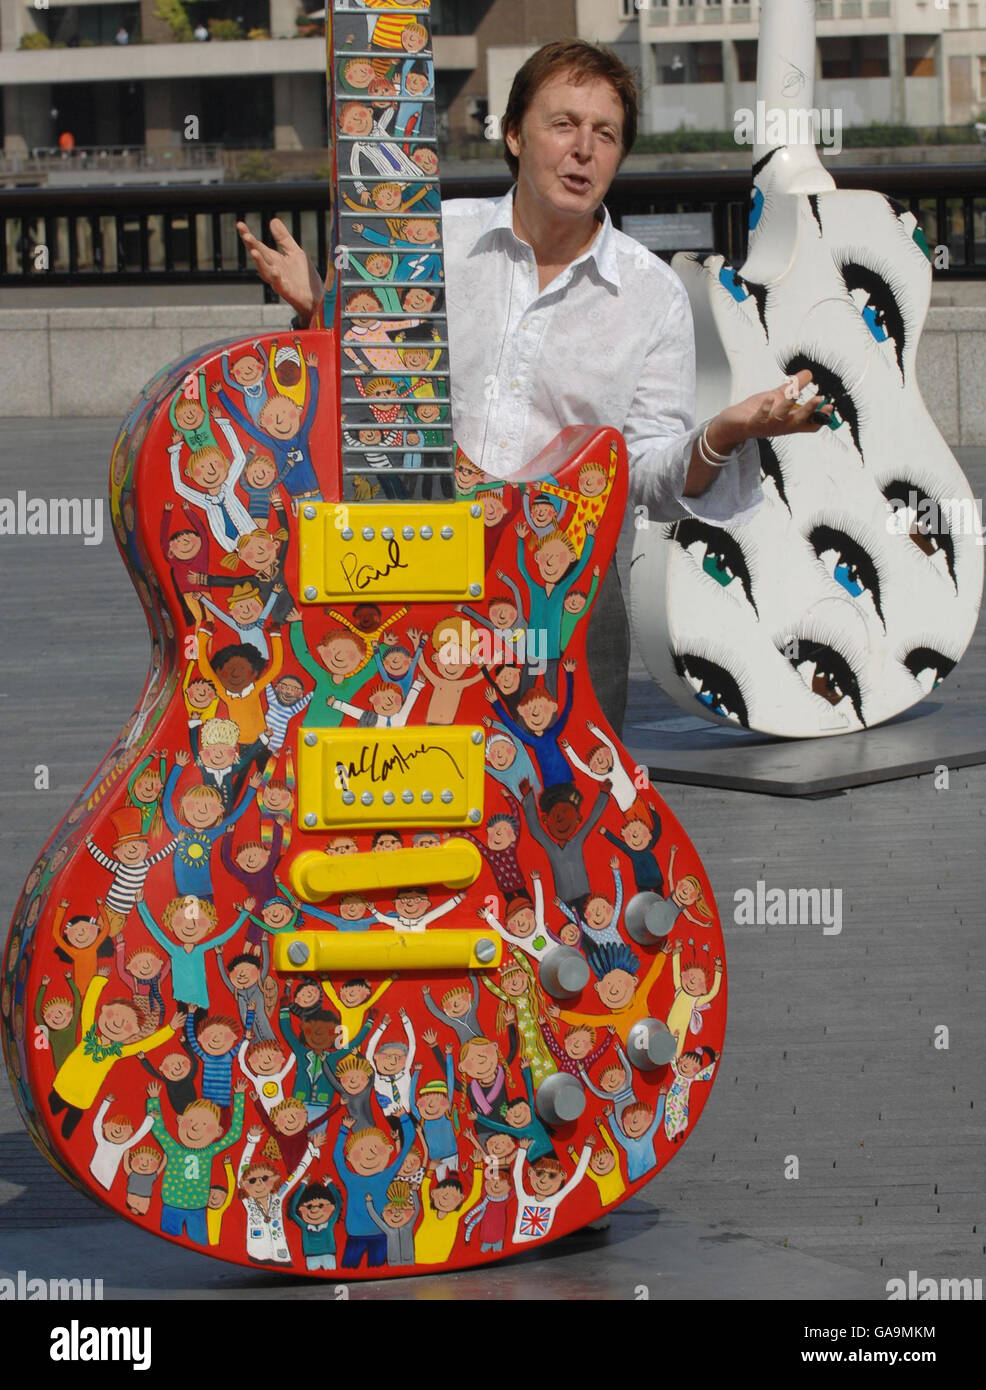 Sir Paul McCartney signs a 10ft high Les Paul Guitar sculpture in central London, painted by artist Rosie Brooks, which forms part of an exhibition at London's City Hall. The guitar along with many others will be auctioned in November to raise money for the Prince's trust. Stock Photo